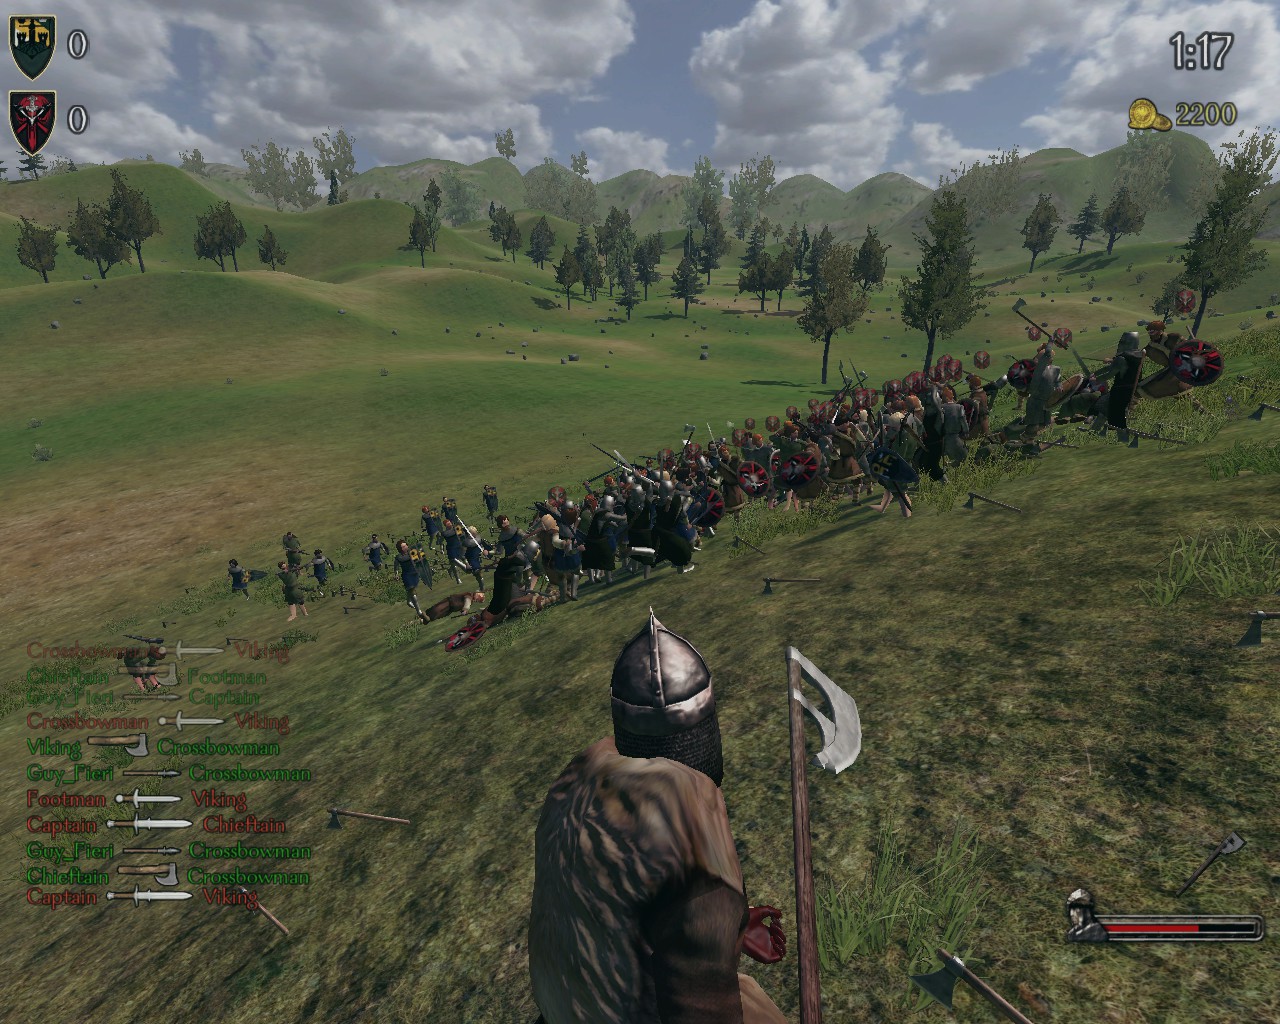 mount and blade honor rating